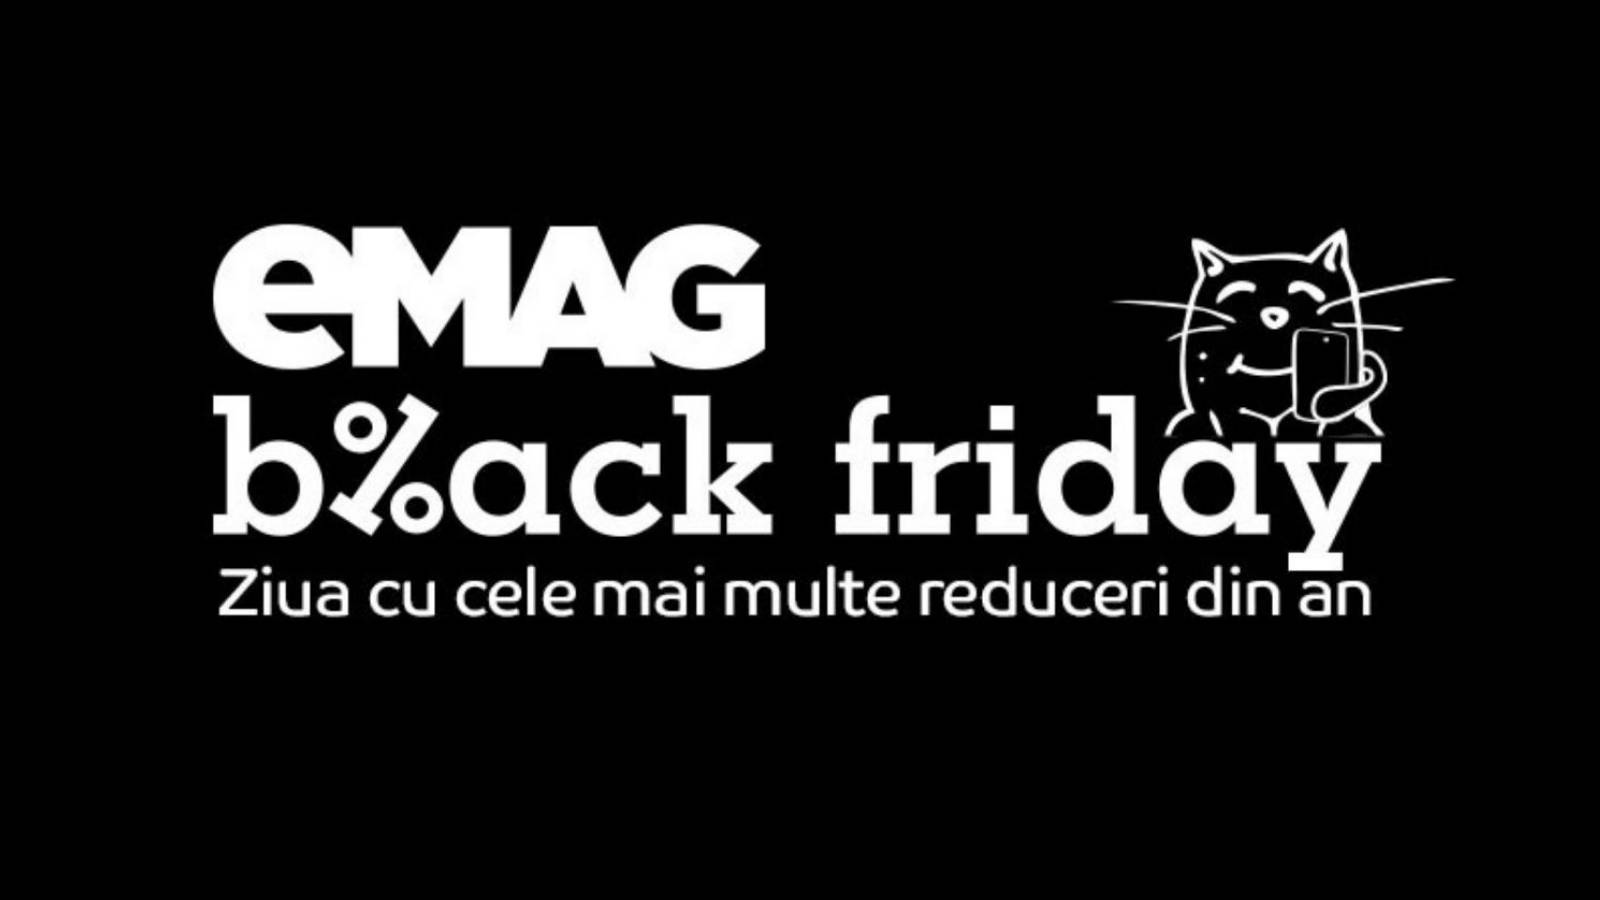 BLACK FRIDAY eMAG offers